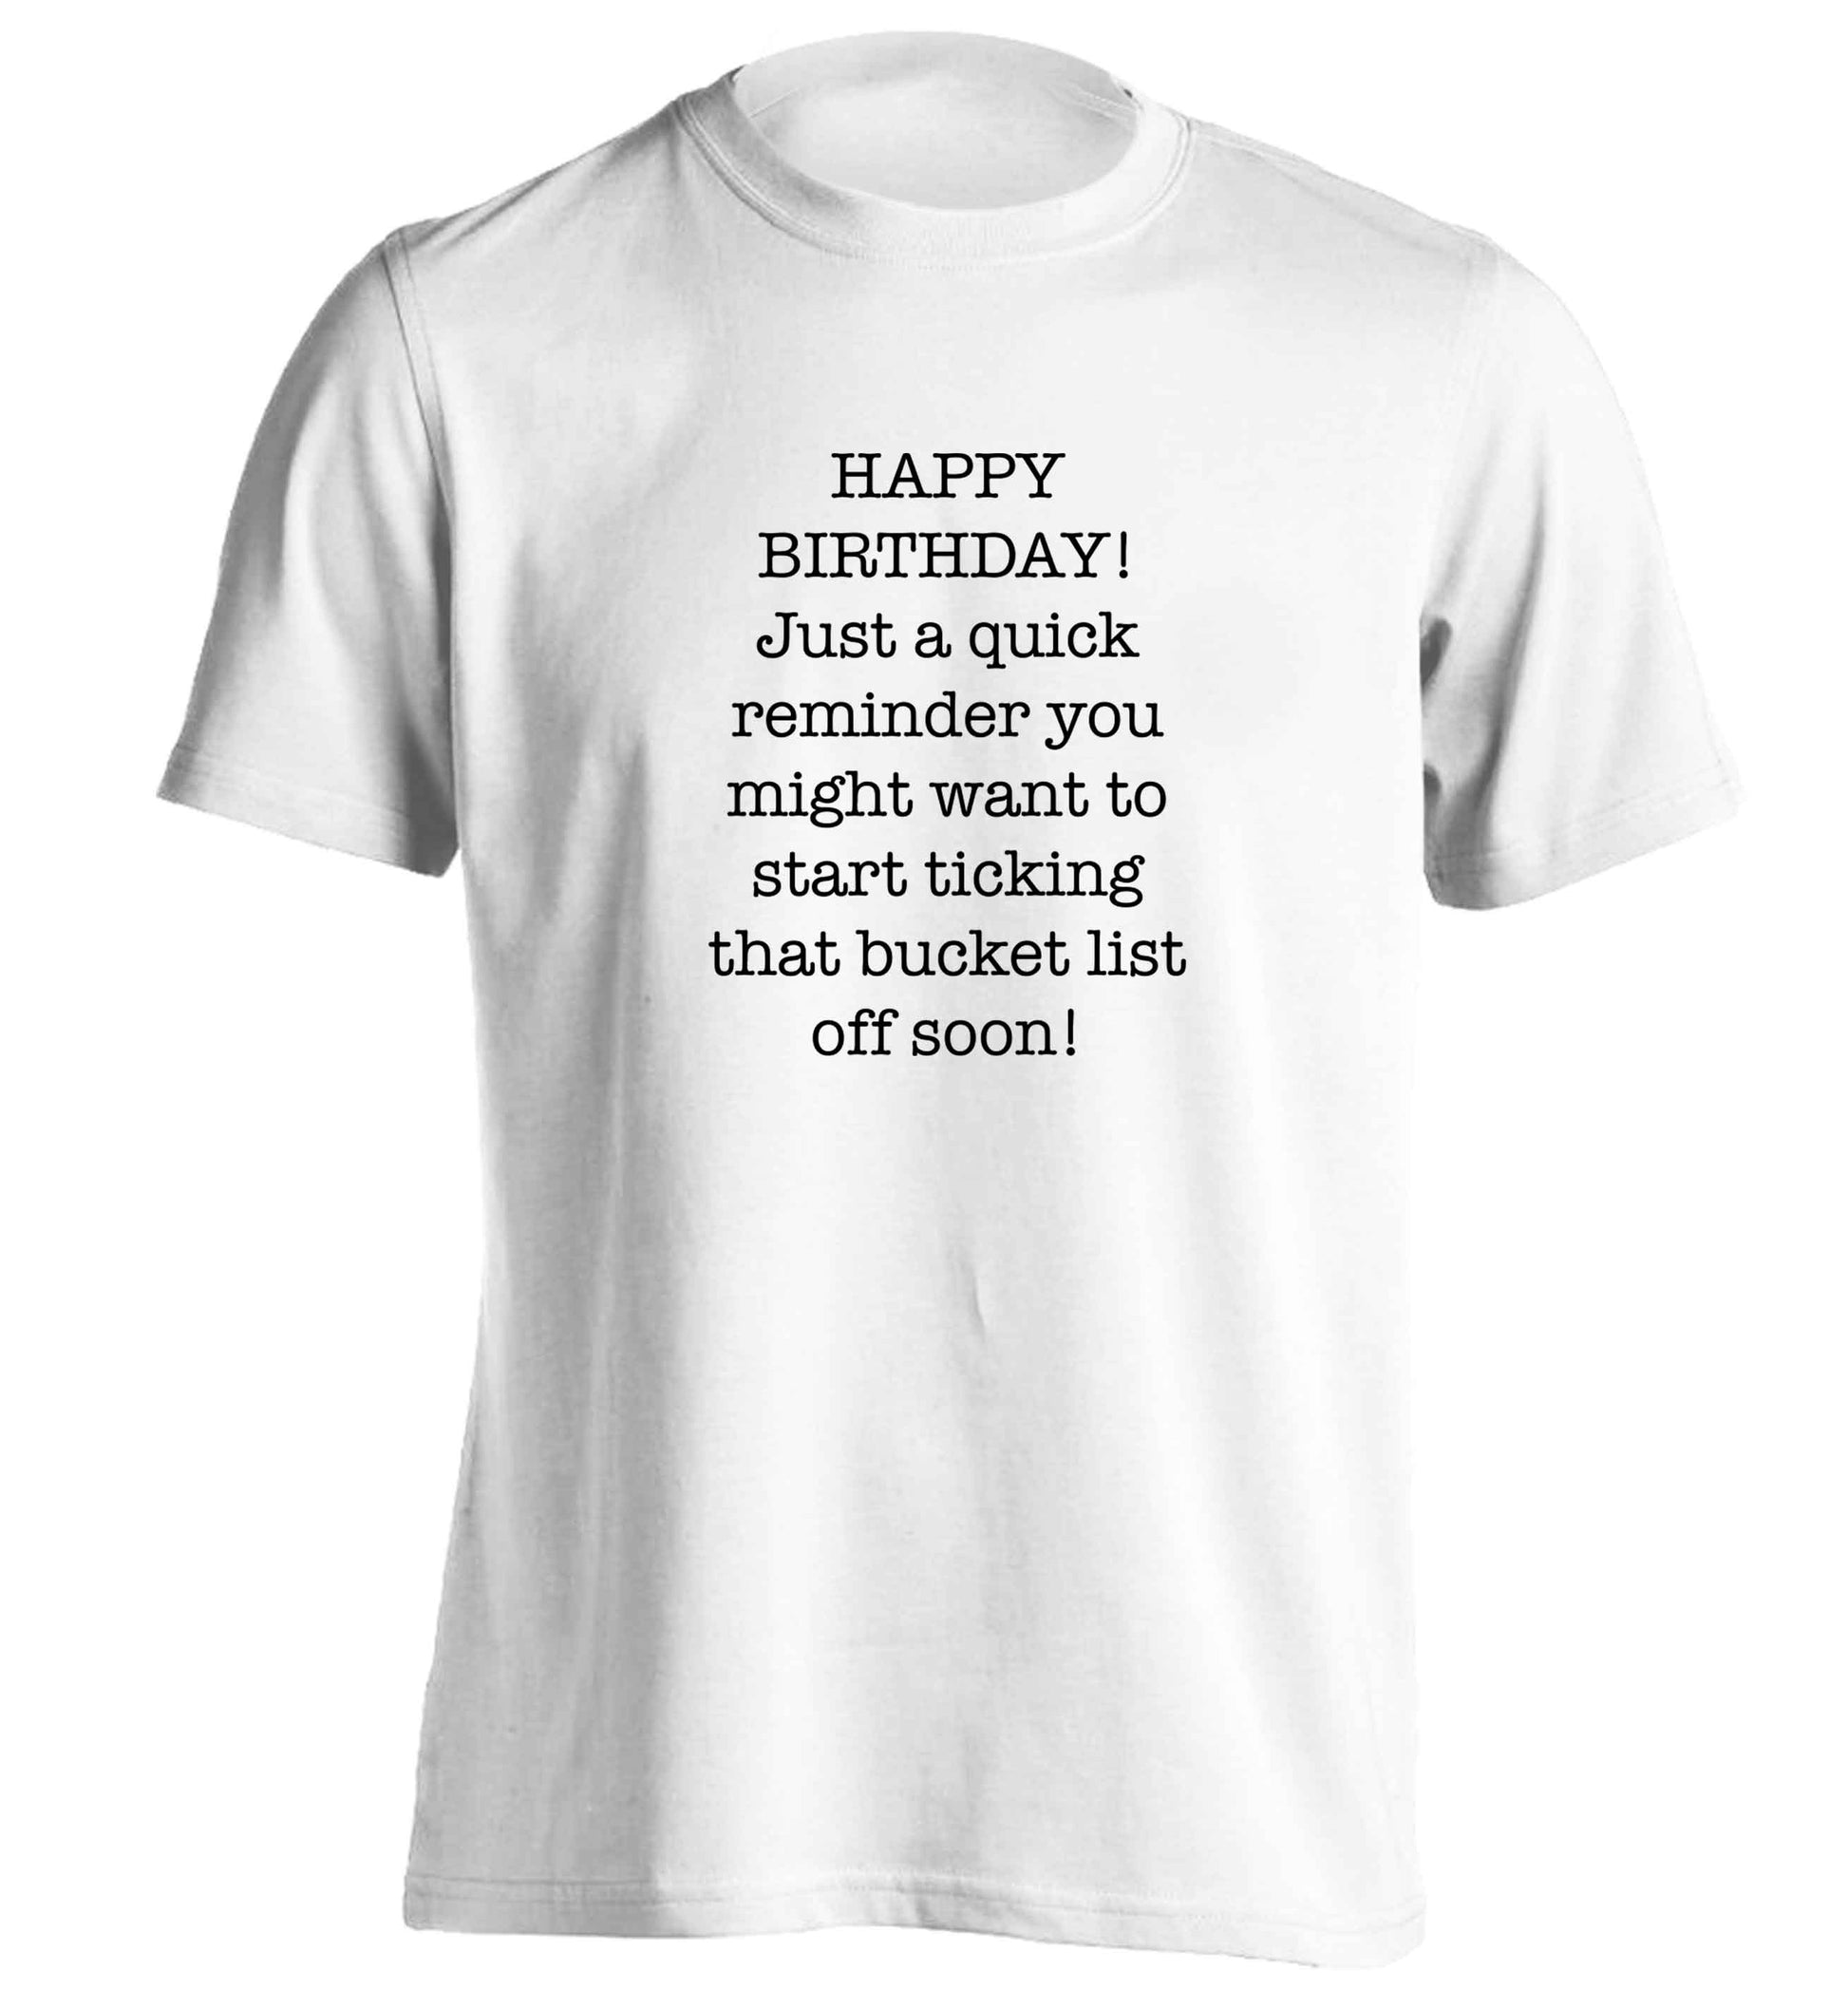 Happy birthday, just a quick reminder you might want to start ticking that bucket list off soon adults unisex white Tshirt 2XL